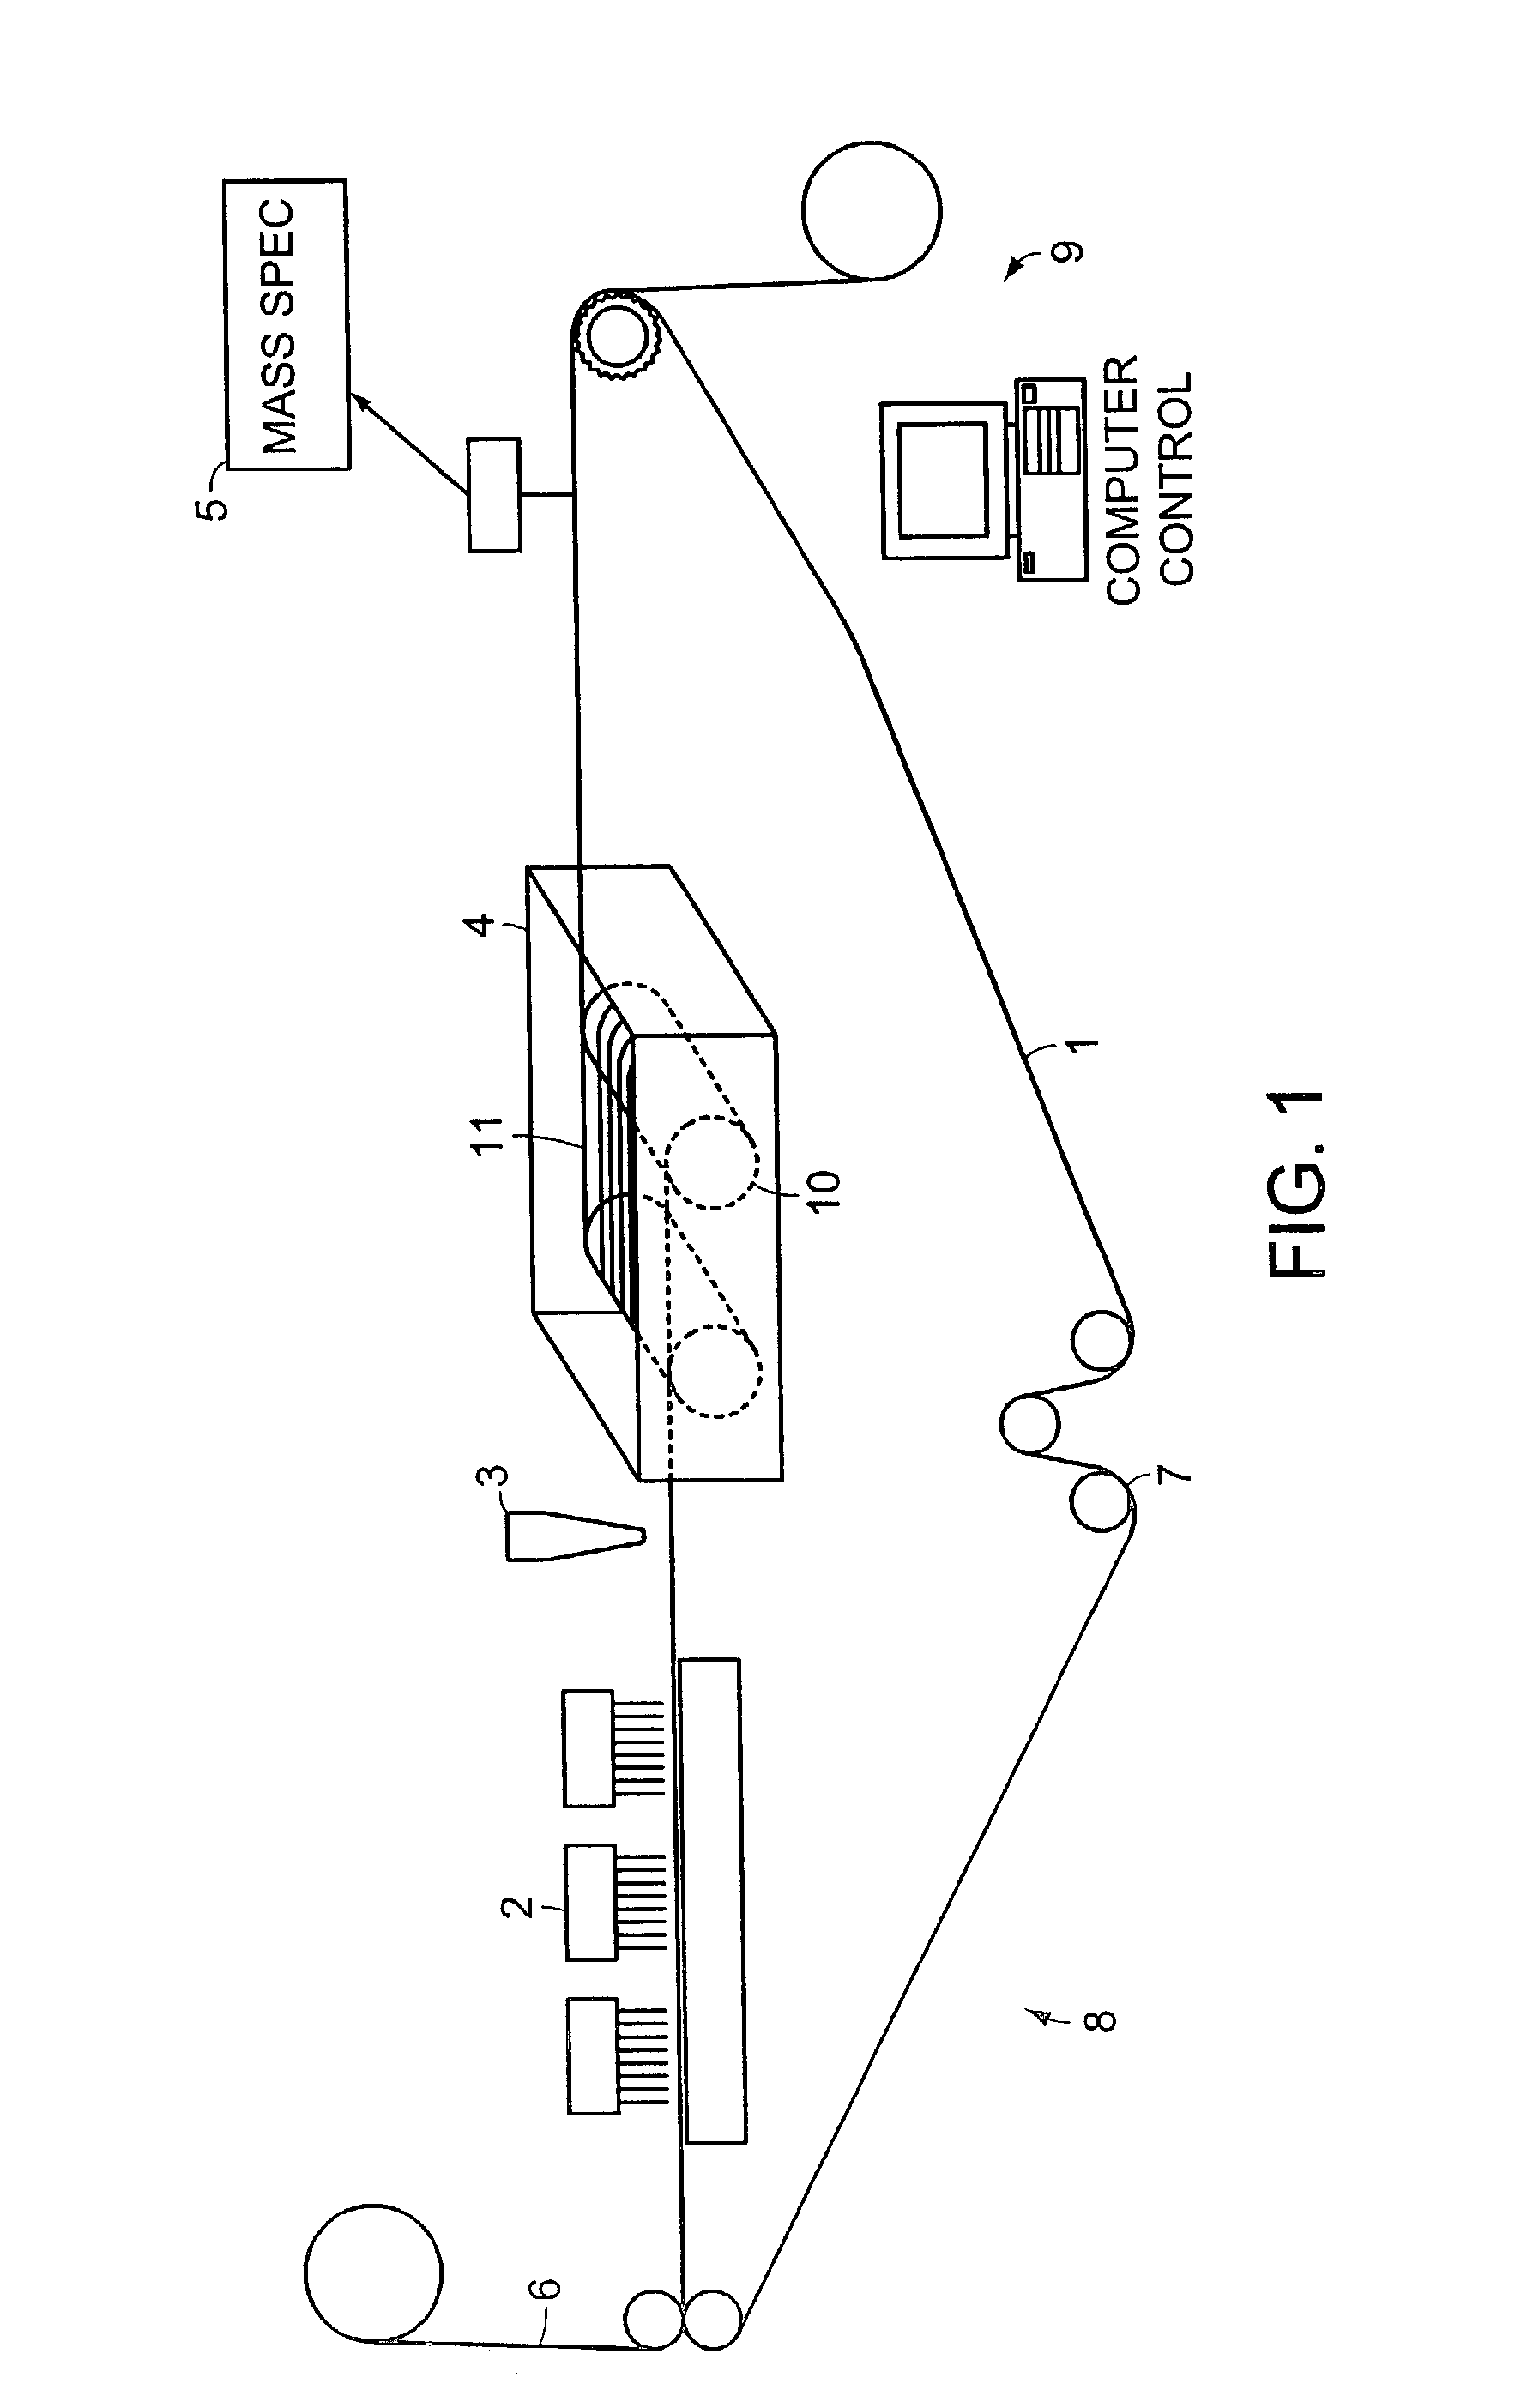 System and method for high throughput screening of droplets